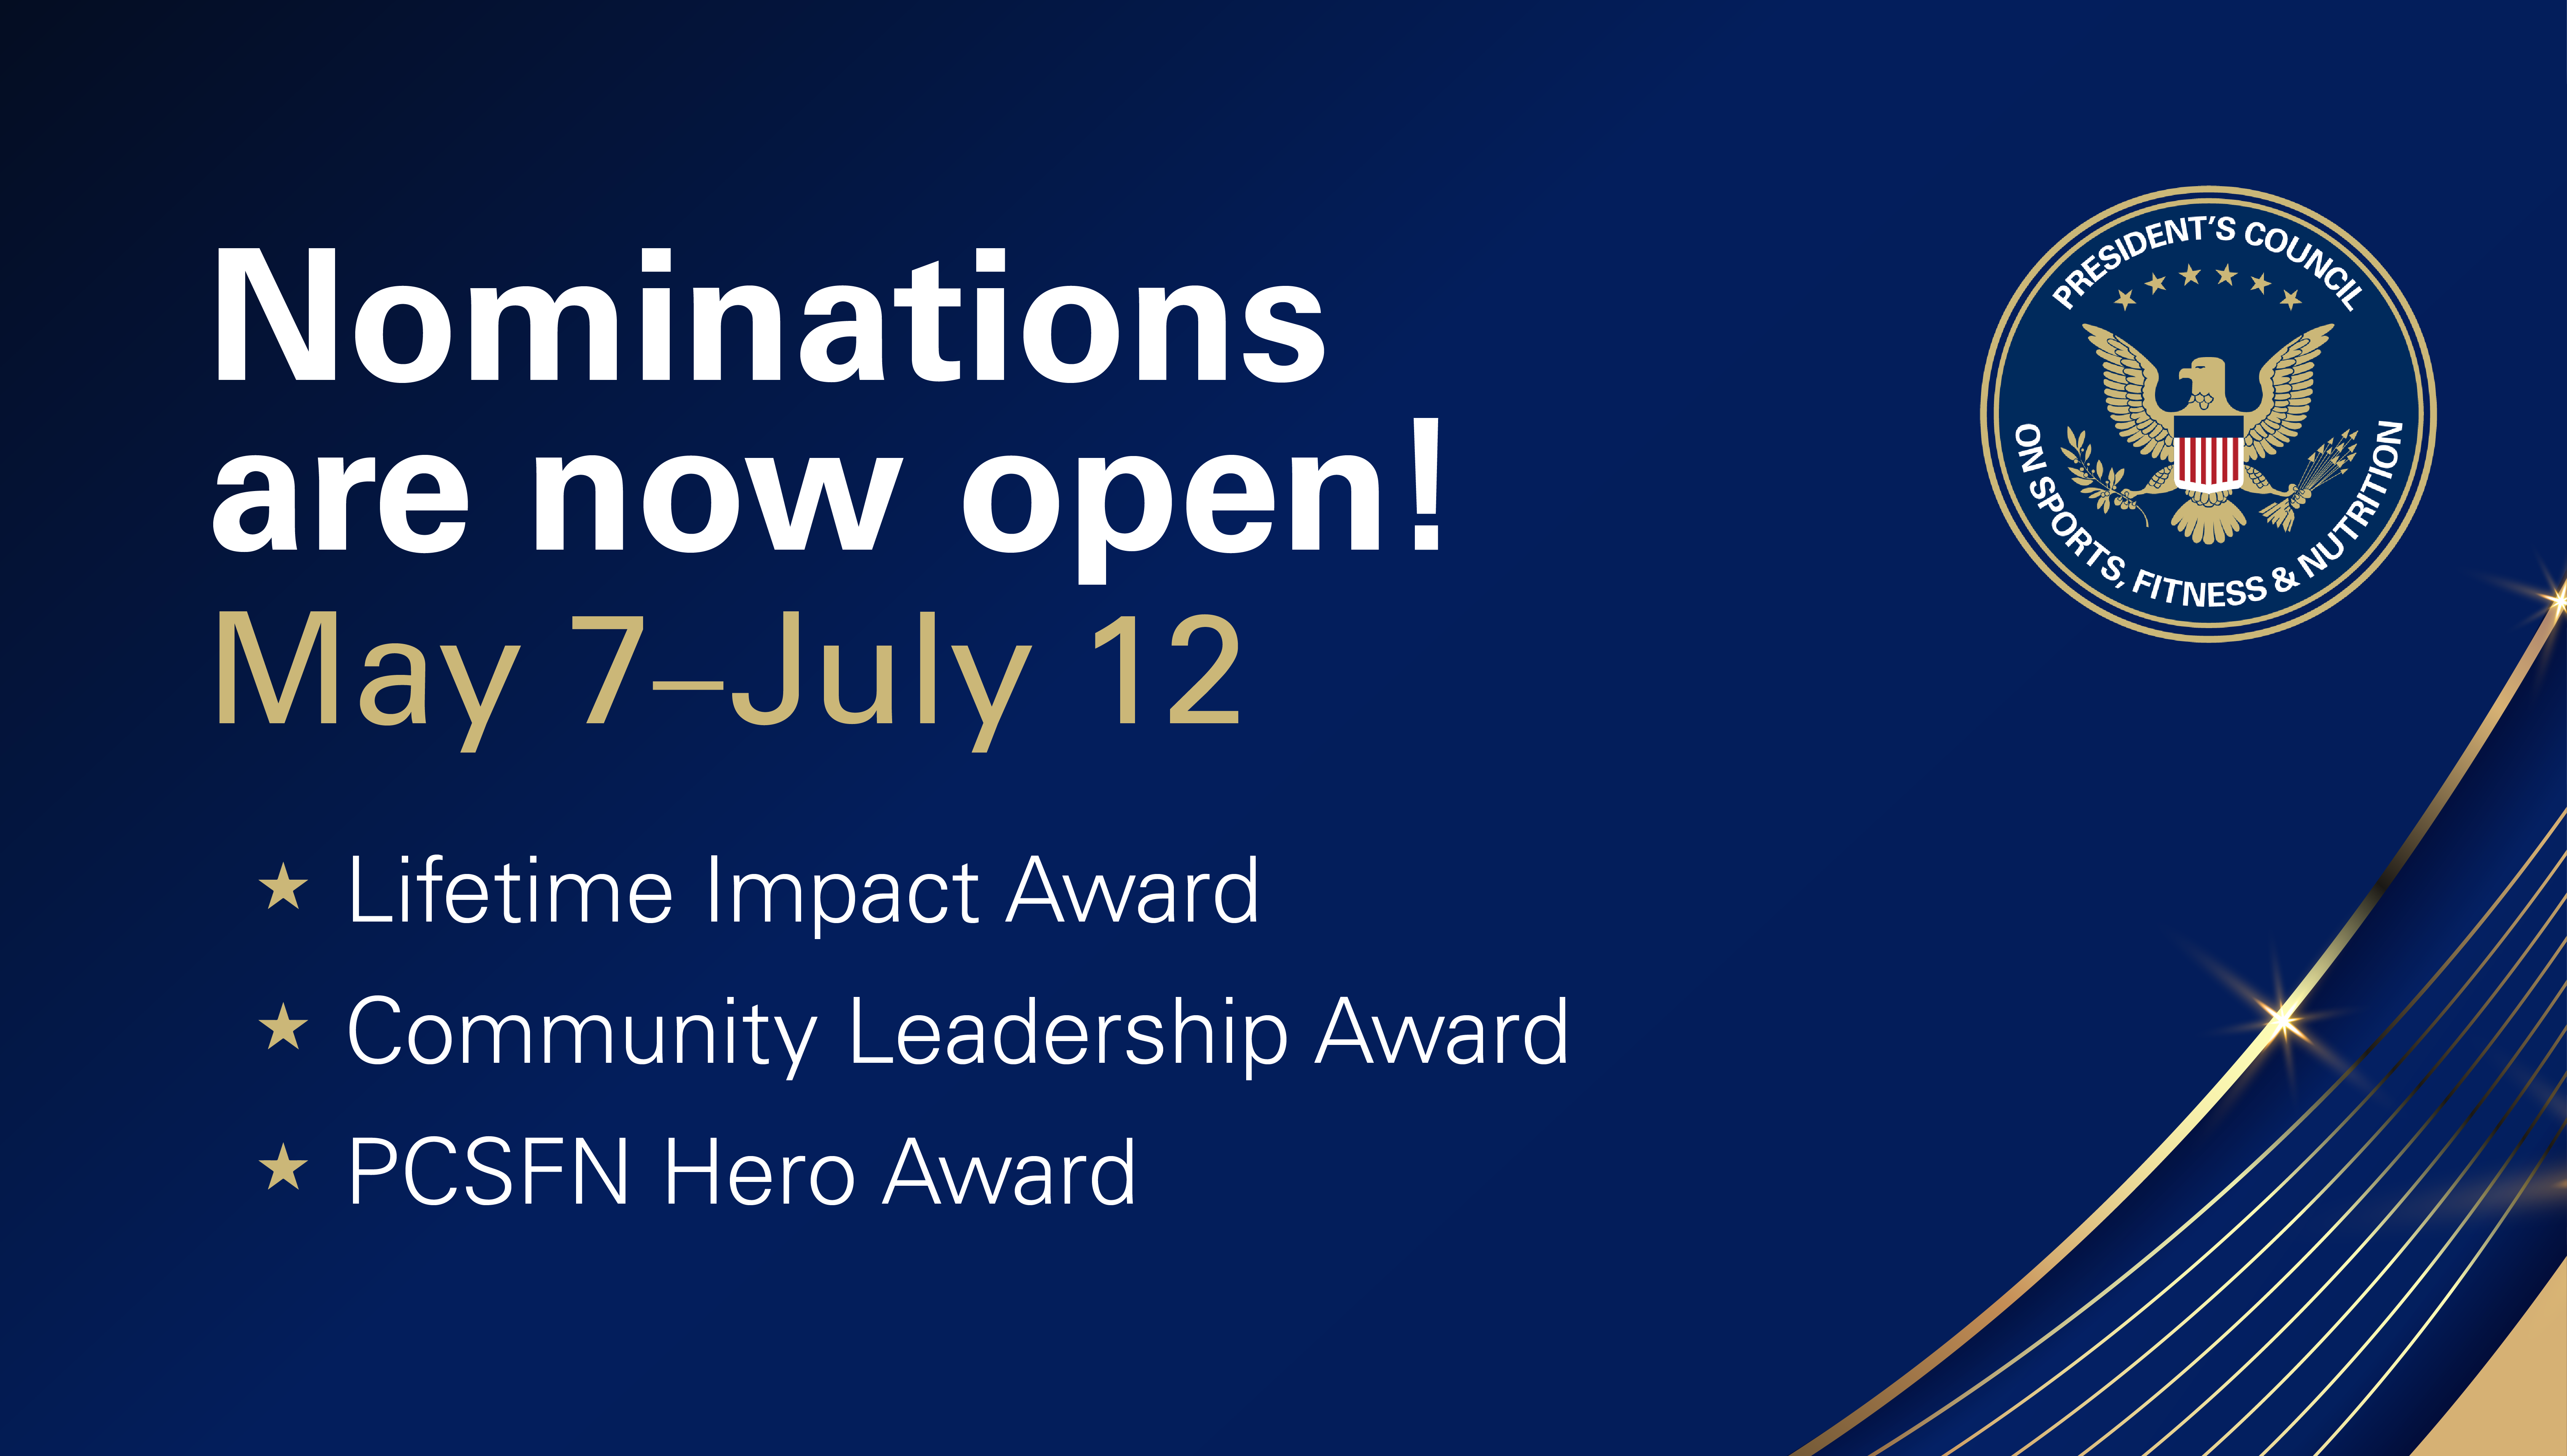 Nominations are now open! May 7-July 12. Lifetime Impact Award; Community Leadership Award; PCSFN Hero Award. Includes image of President's Council on Sports, Fitness & Nutrition seal.